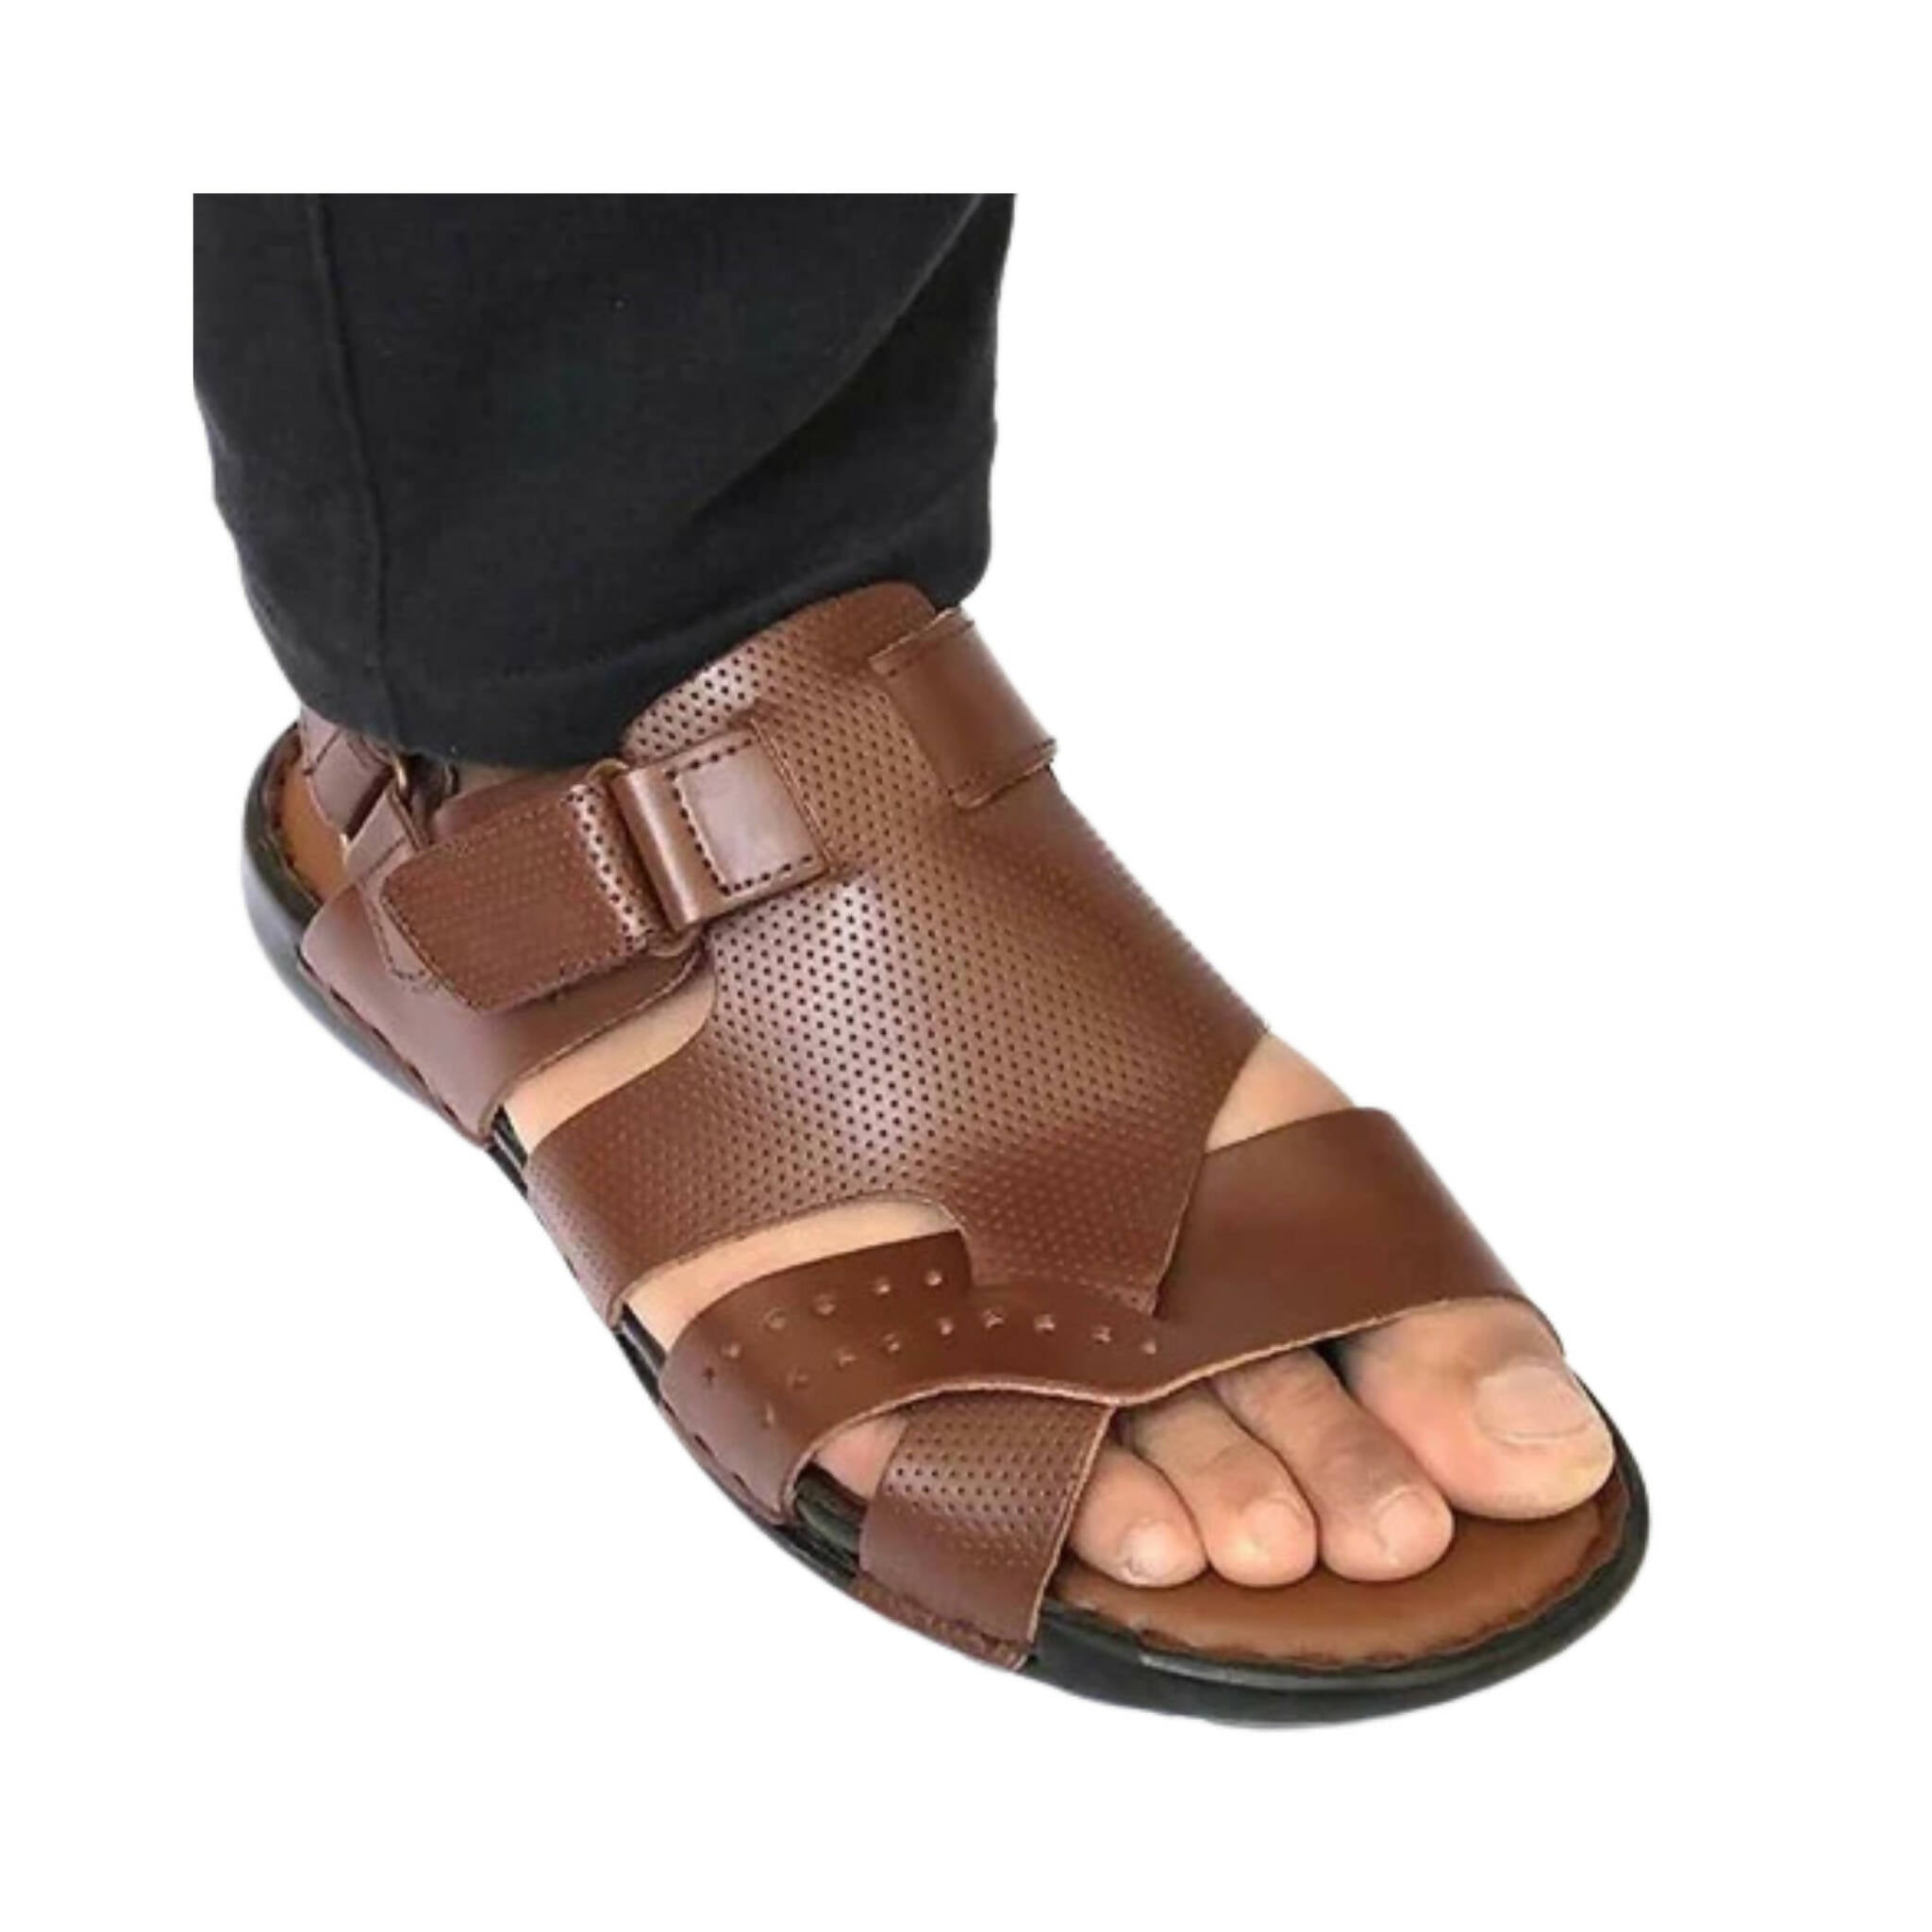 Sandals, Customizable and Secure Fit, Color Brown, for Men's